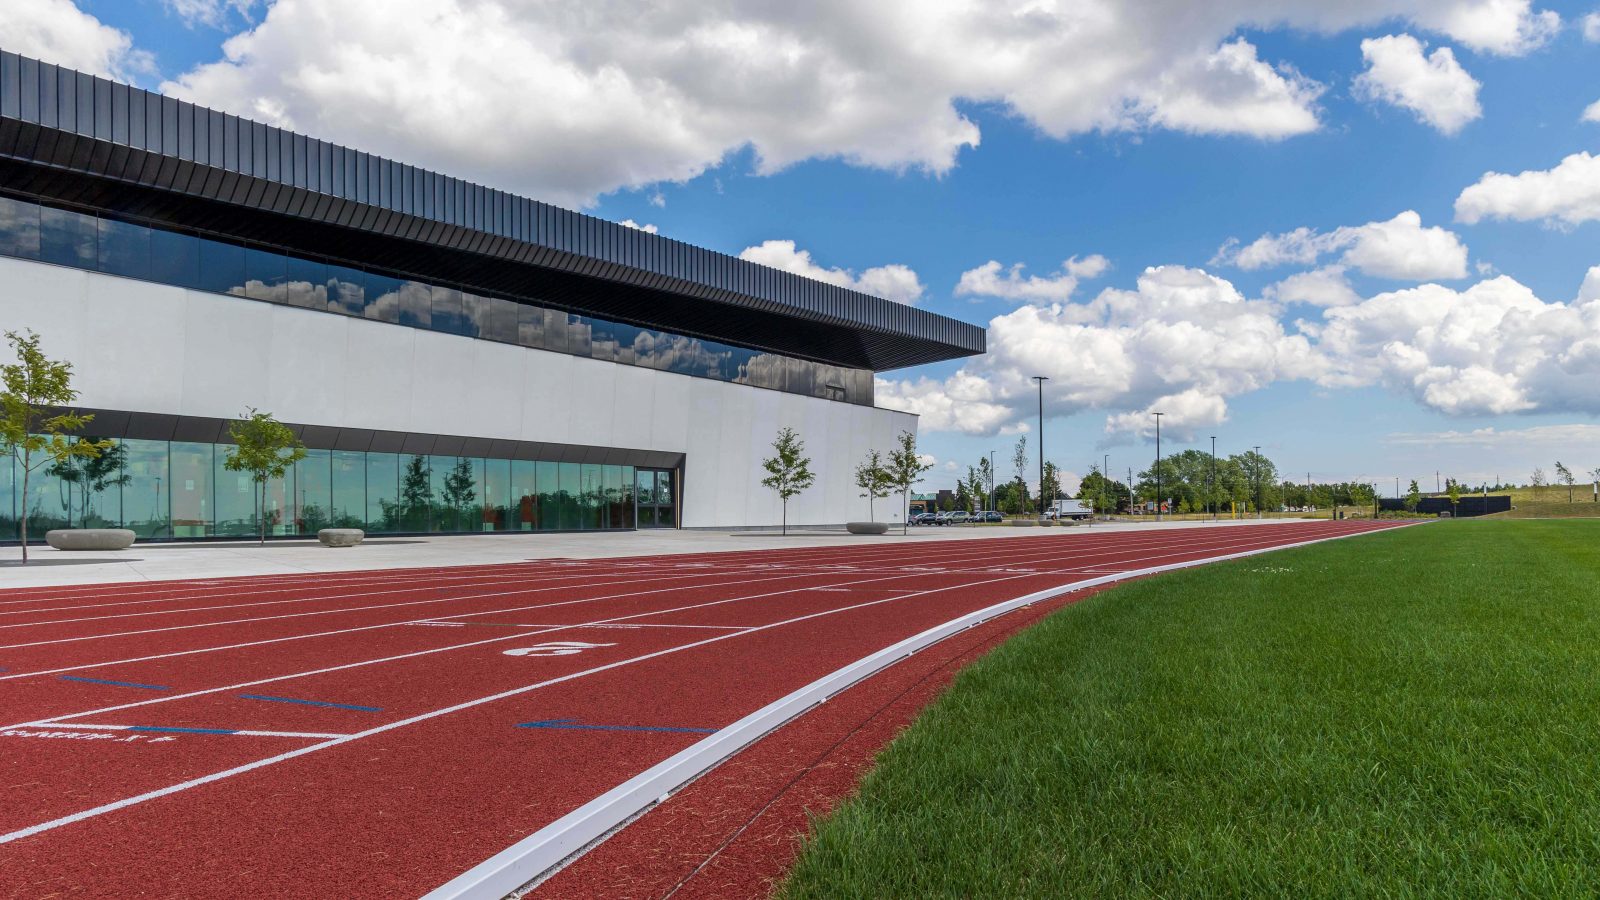 A view of Canada Games Park with the track in frame, facing the direction of Brock University.